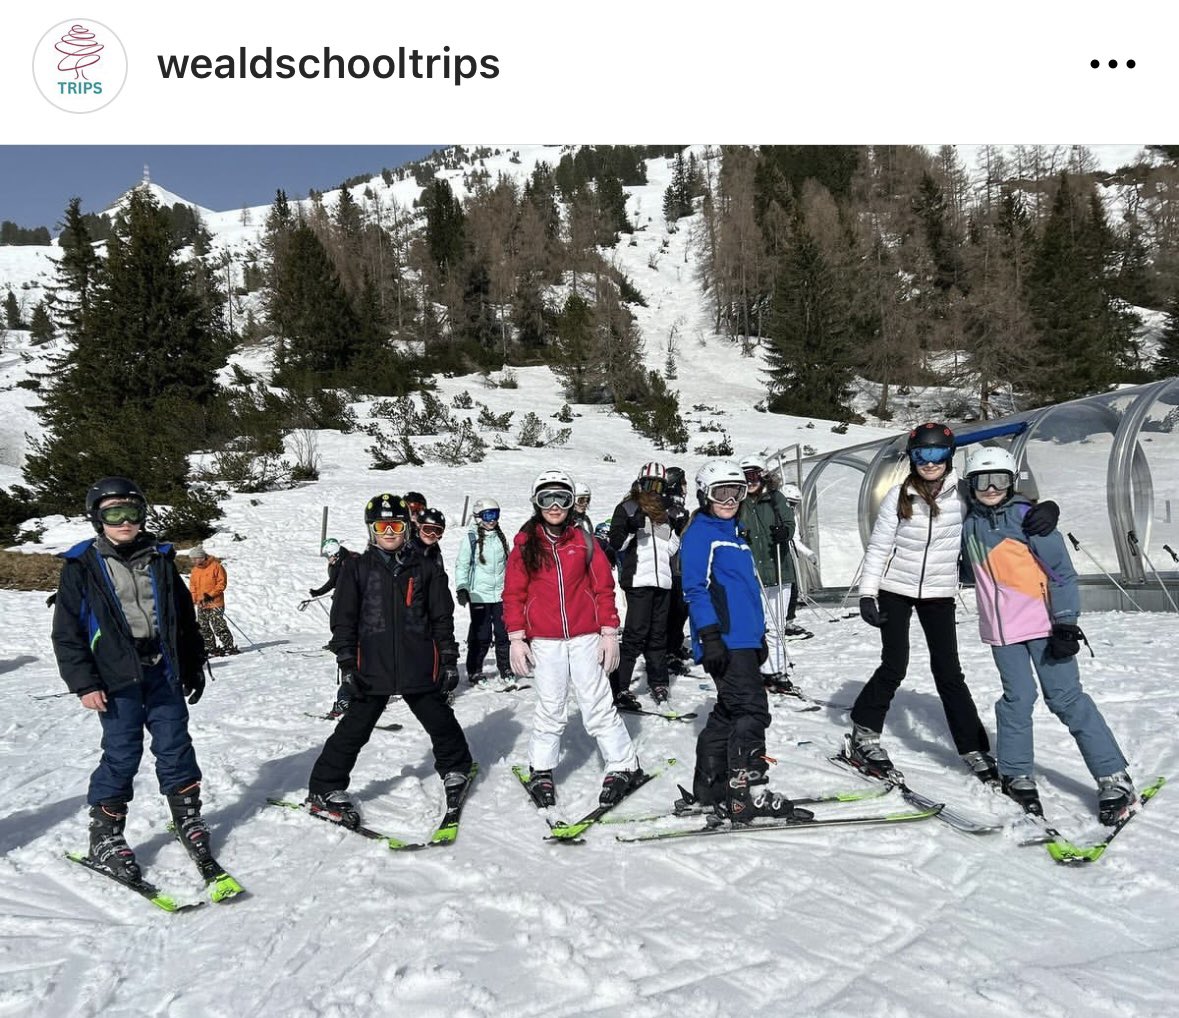 Day 3 - We are coming for you. Yesterday saw multiple students flying down the higher slopes. Incredible progress being made all. 👏🏻 ⛷️ #proudoftheweald #opportunityandcommunity